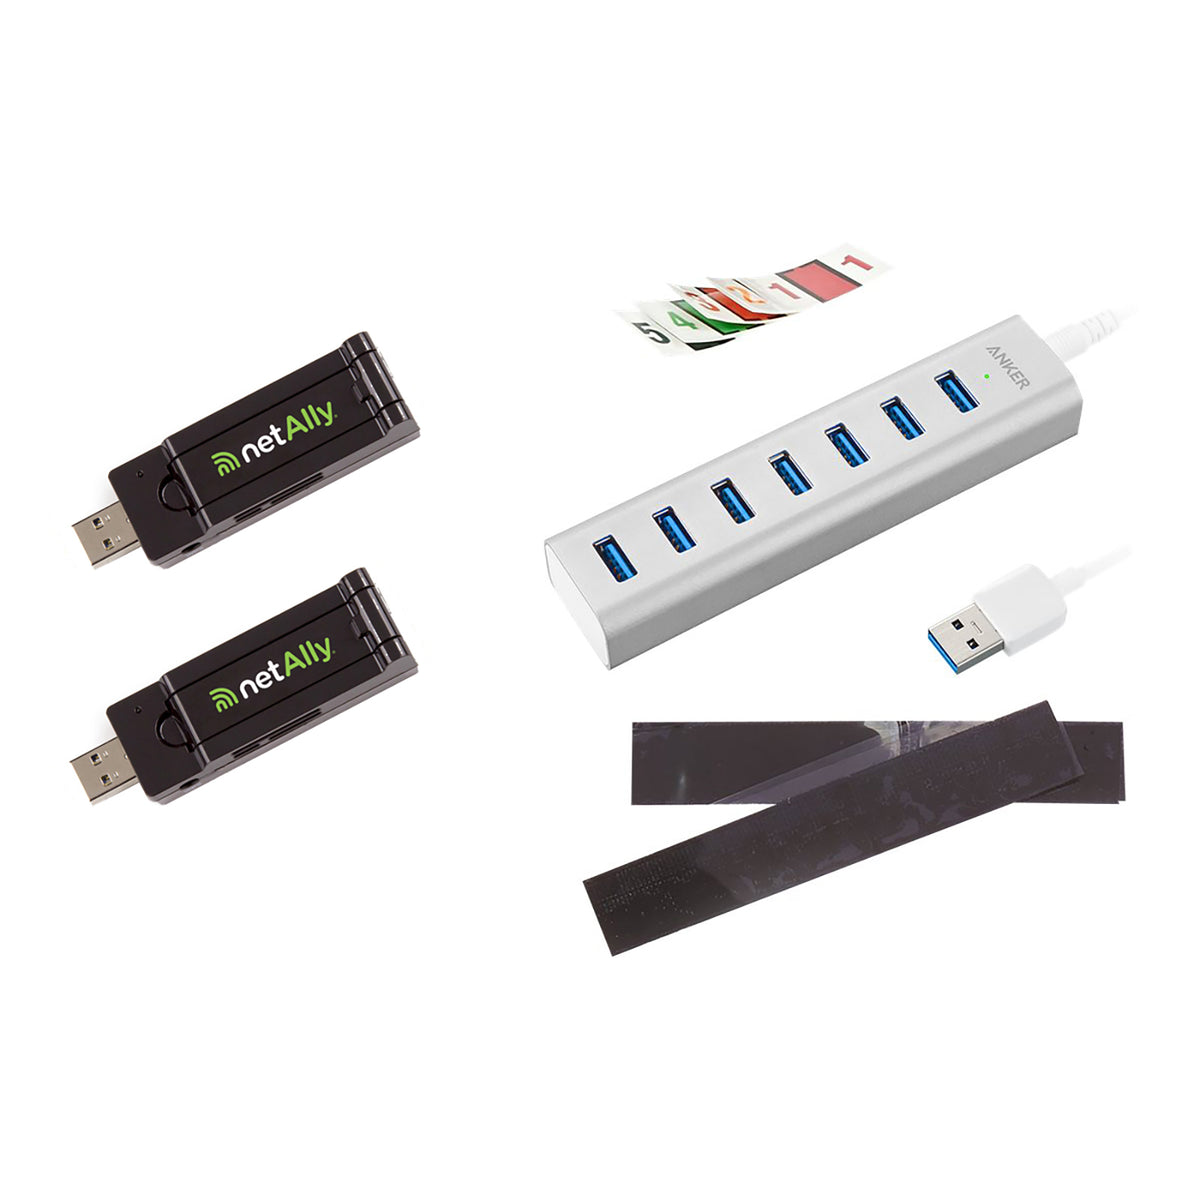 NetAlly Multi-Adapter kit for AirMagnet Survey PRO, includes 2 NetAlly D1080 802.11a/b/g/n/ac USB Adapters and a USB hub